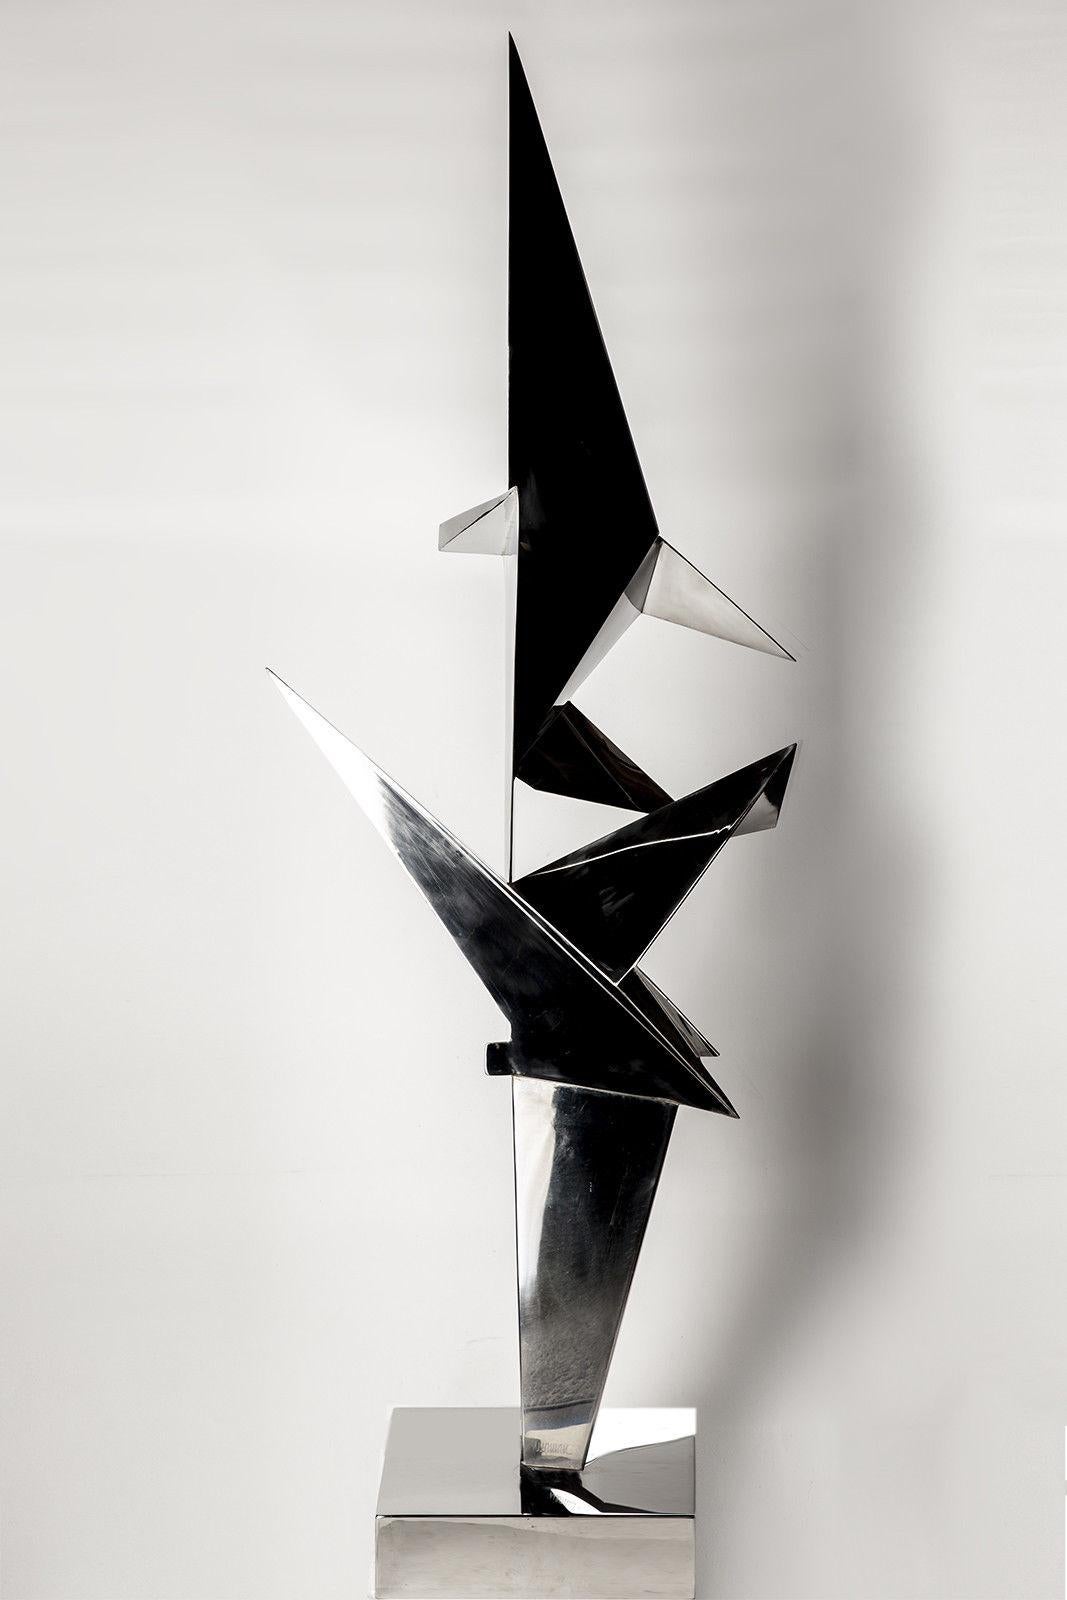 Artist: Leonardo Nierman
Title: Cosmos
Medium: Steel Sculpture
Size: 90" x 47" x 32" (92" with base)
Edition: x/VI  x/6
Certificate of Authenticity included directly from the Henry Hirsch Collection. You can read more on this collection in the